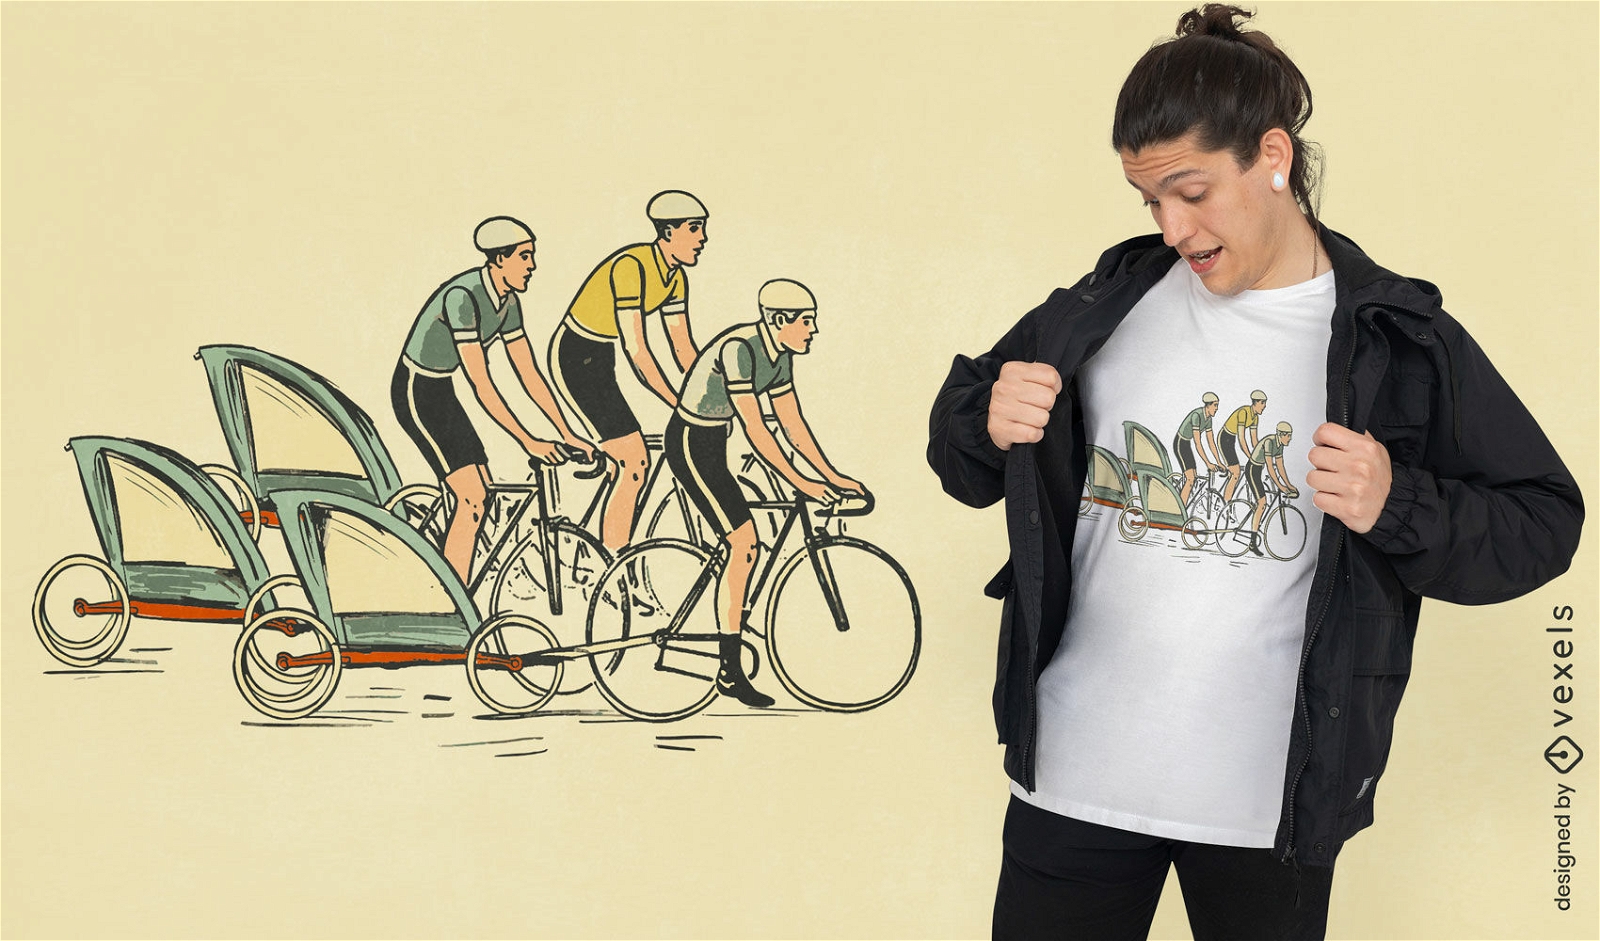 Cyclists carrying child trailers t-shirt design